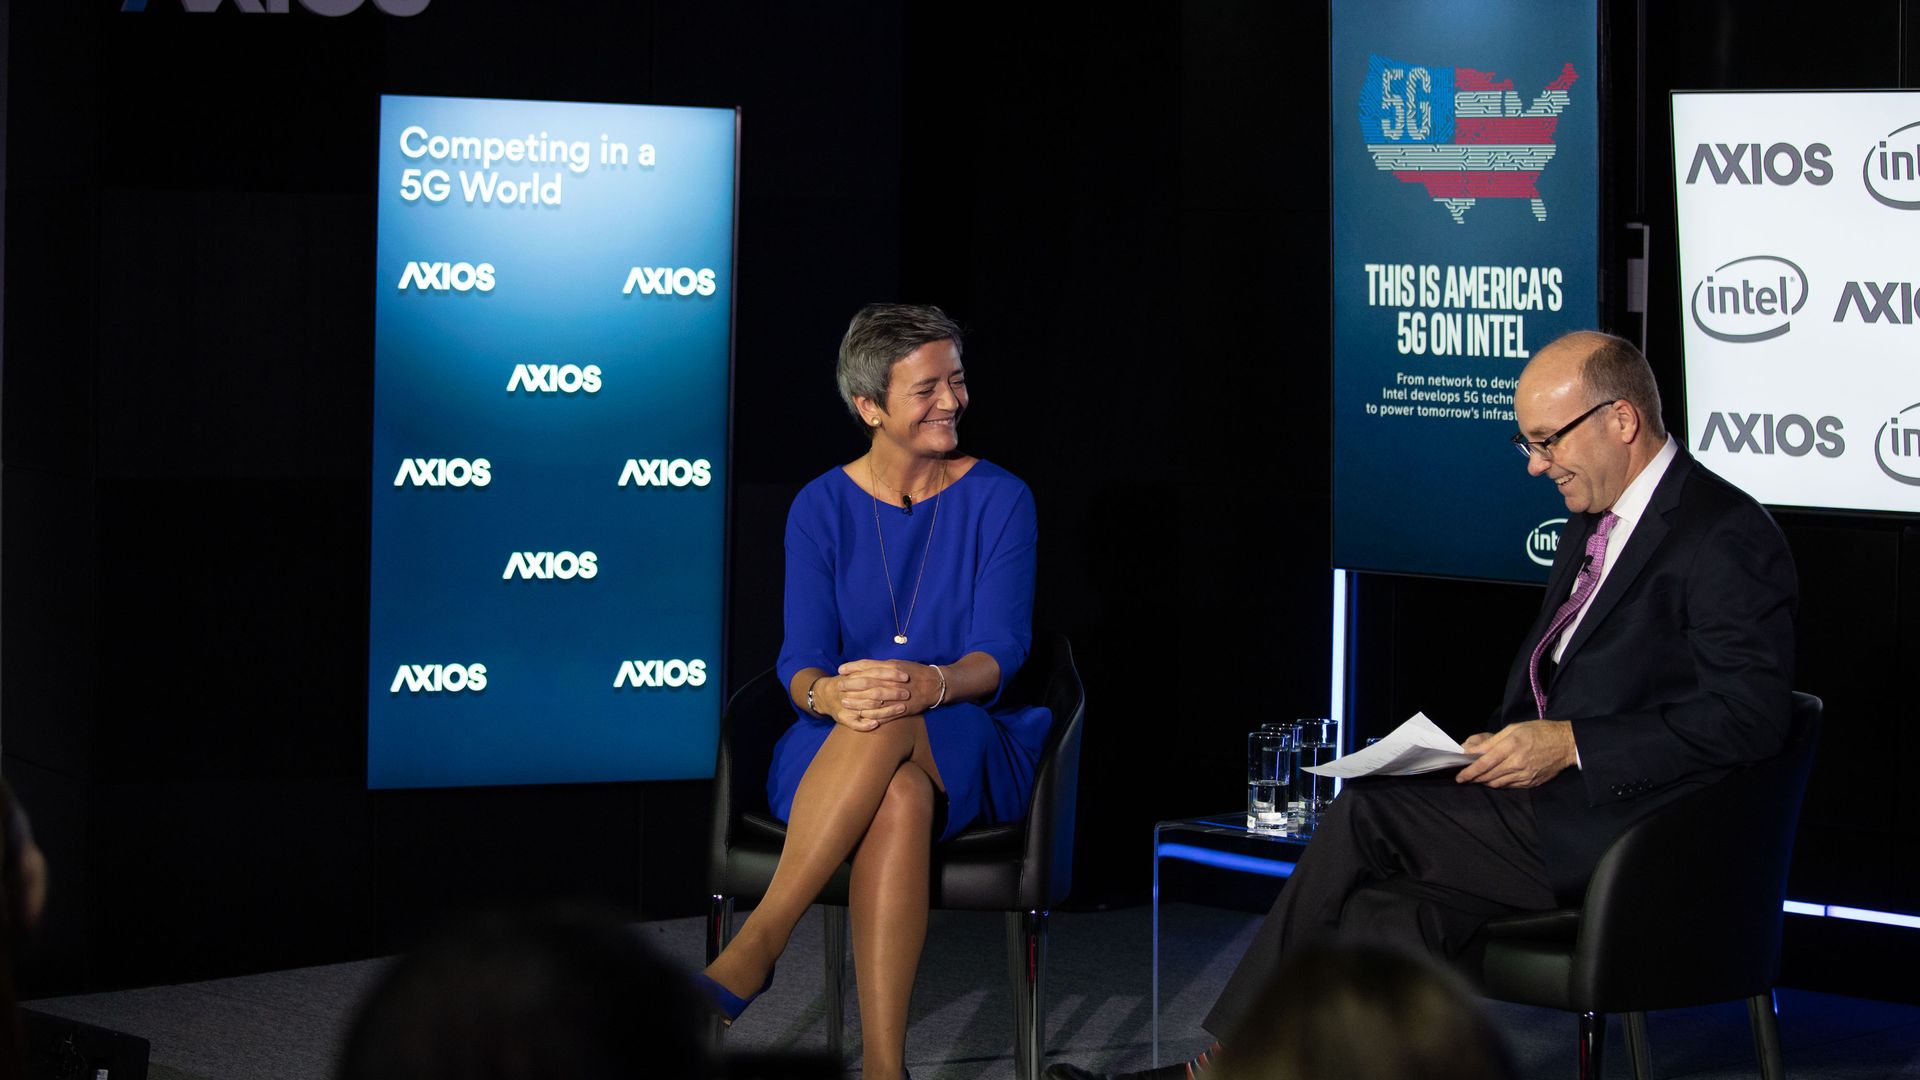 Mike Allen and Commissioner Vestager on the Axios stage